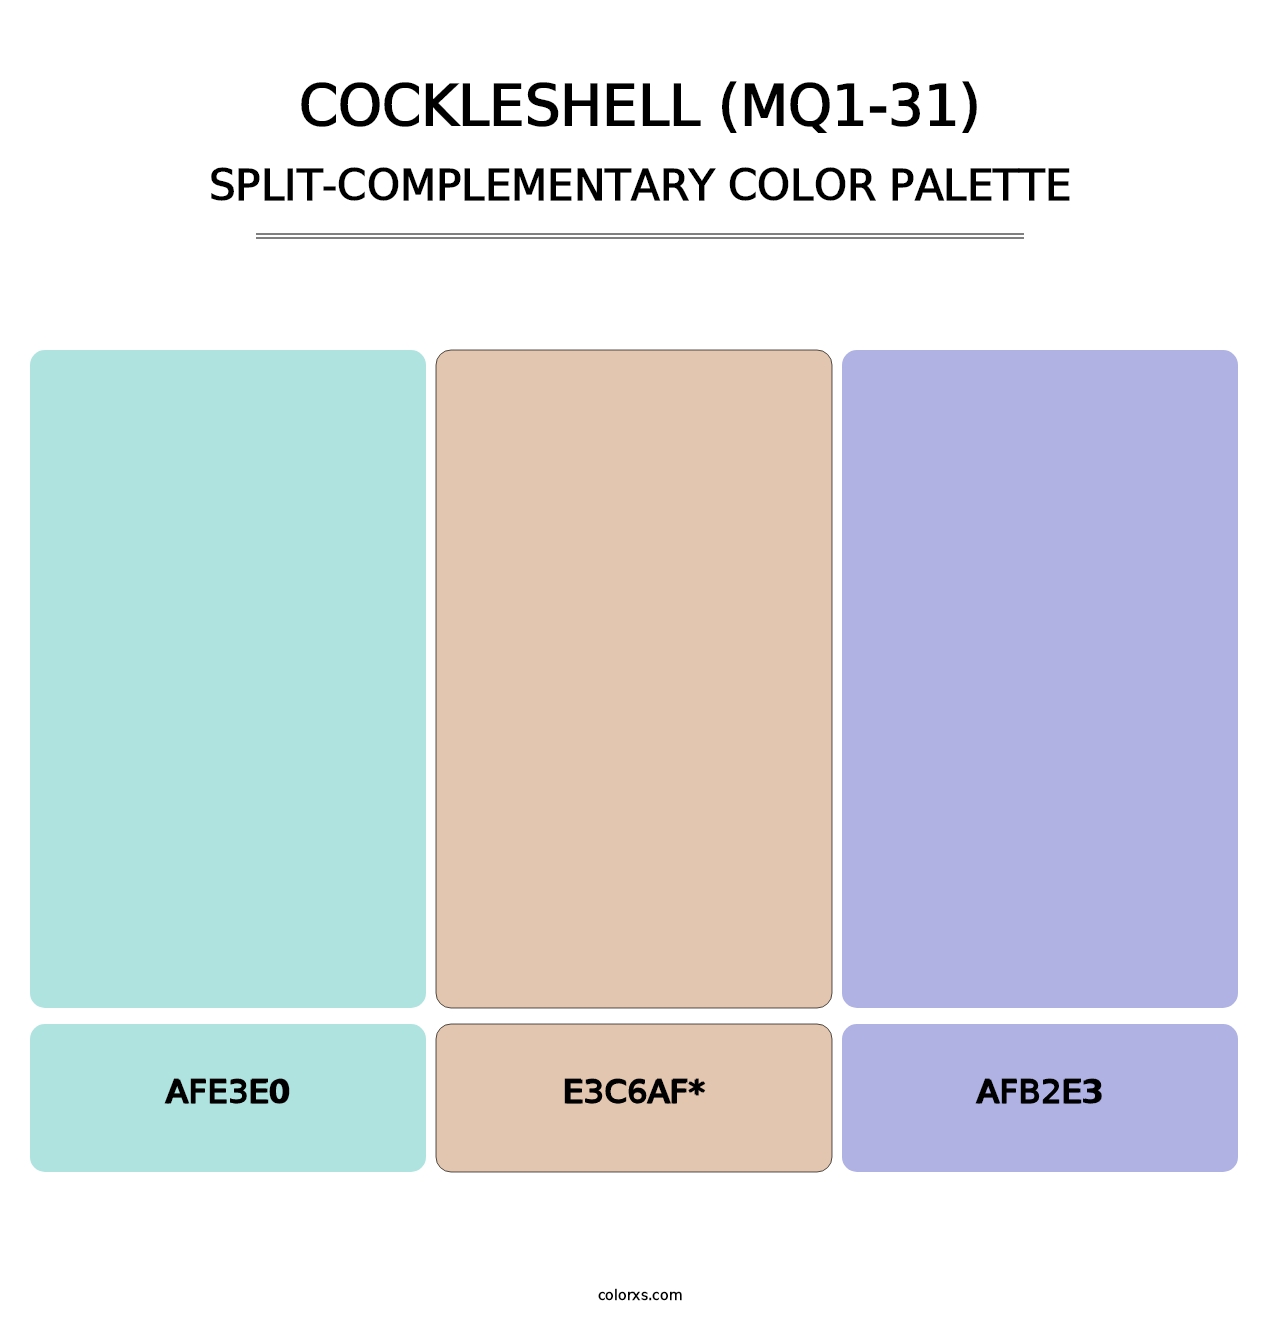 Cockleshell (MQ1-31) - Split-Complementary Color Palette